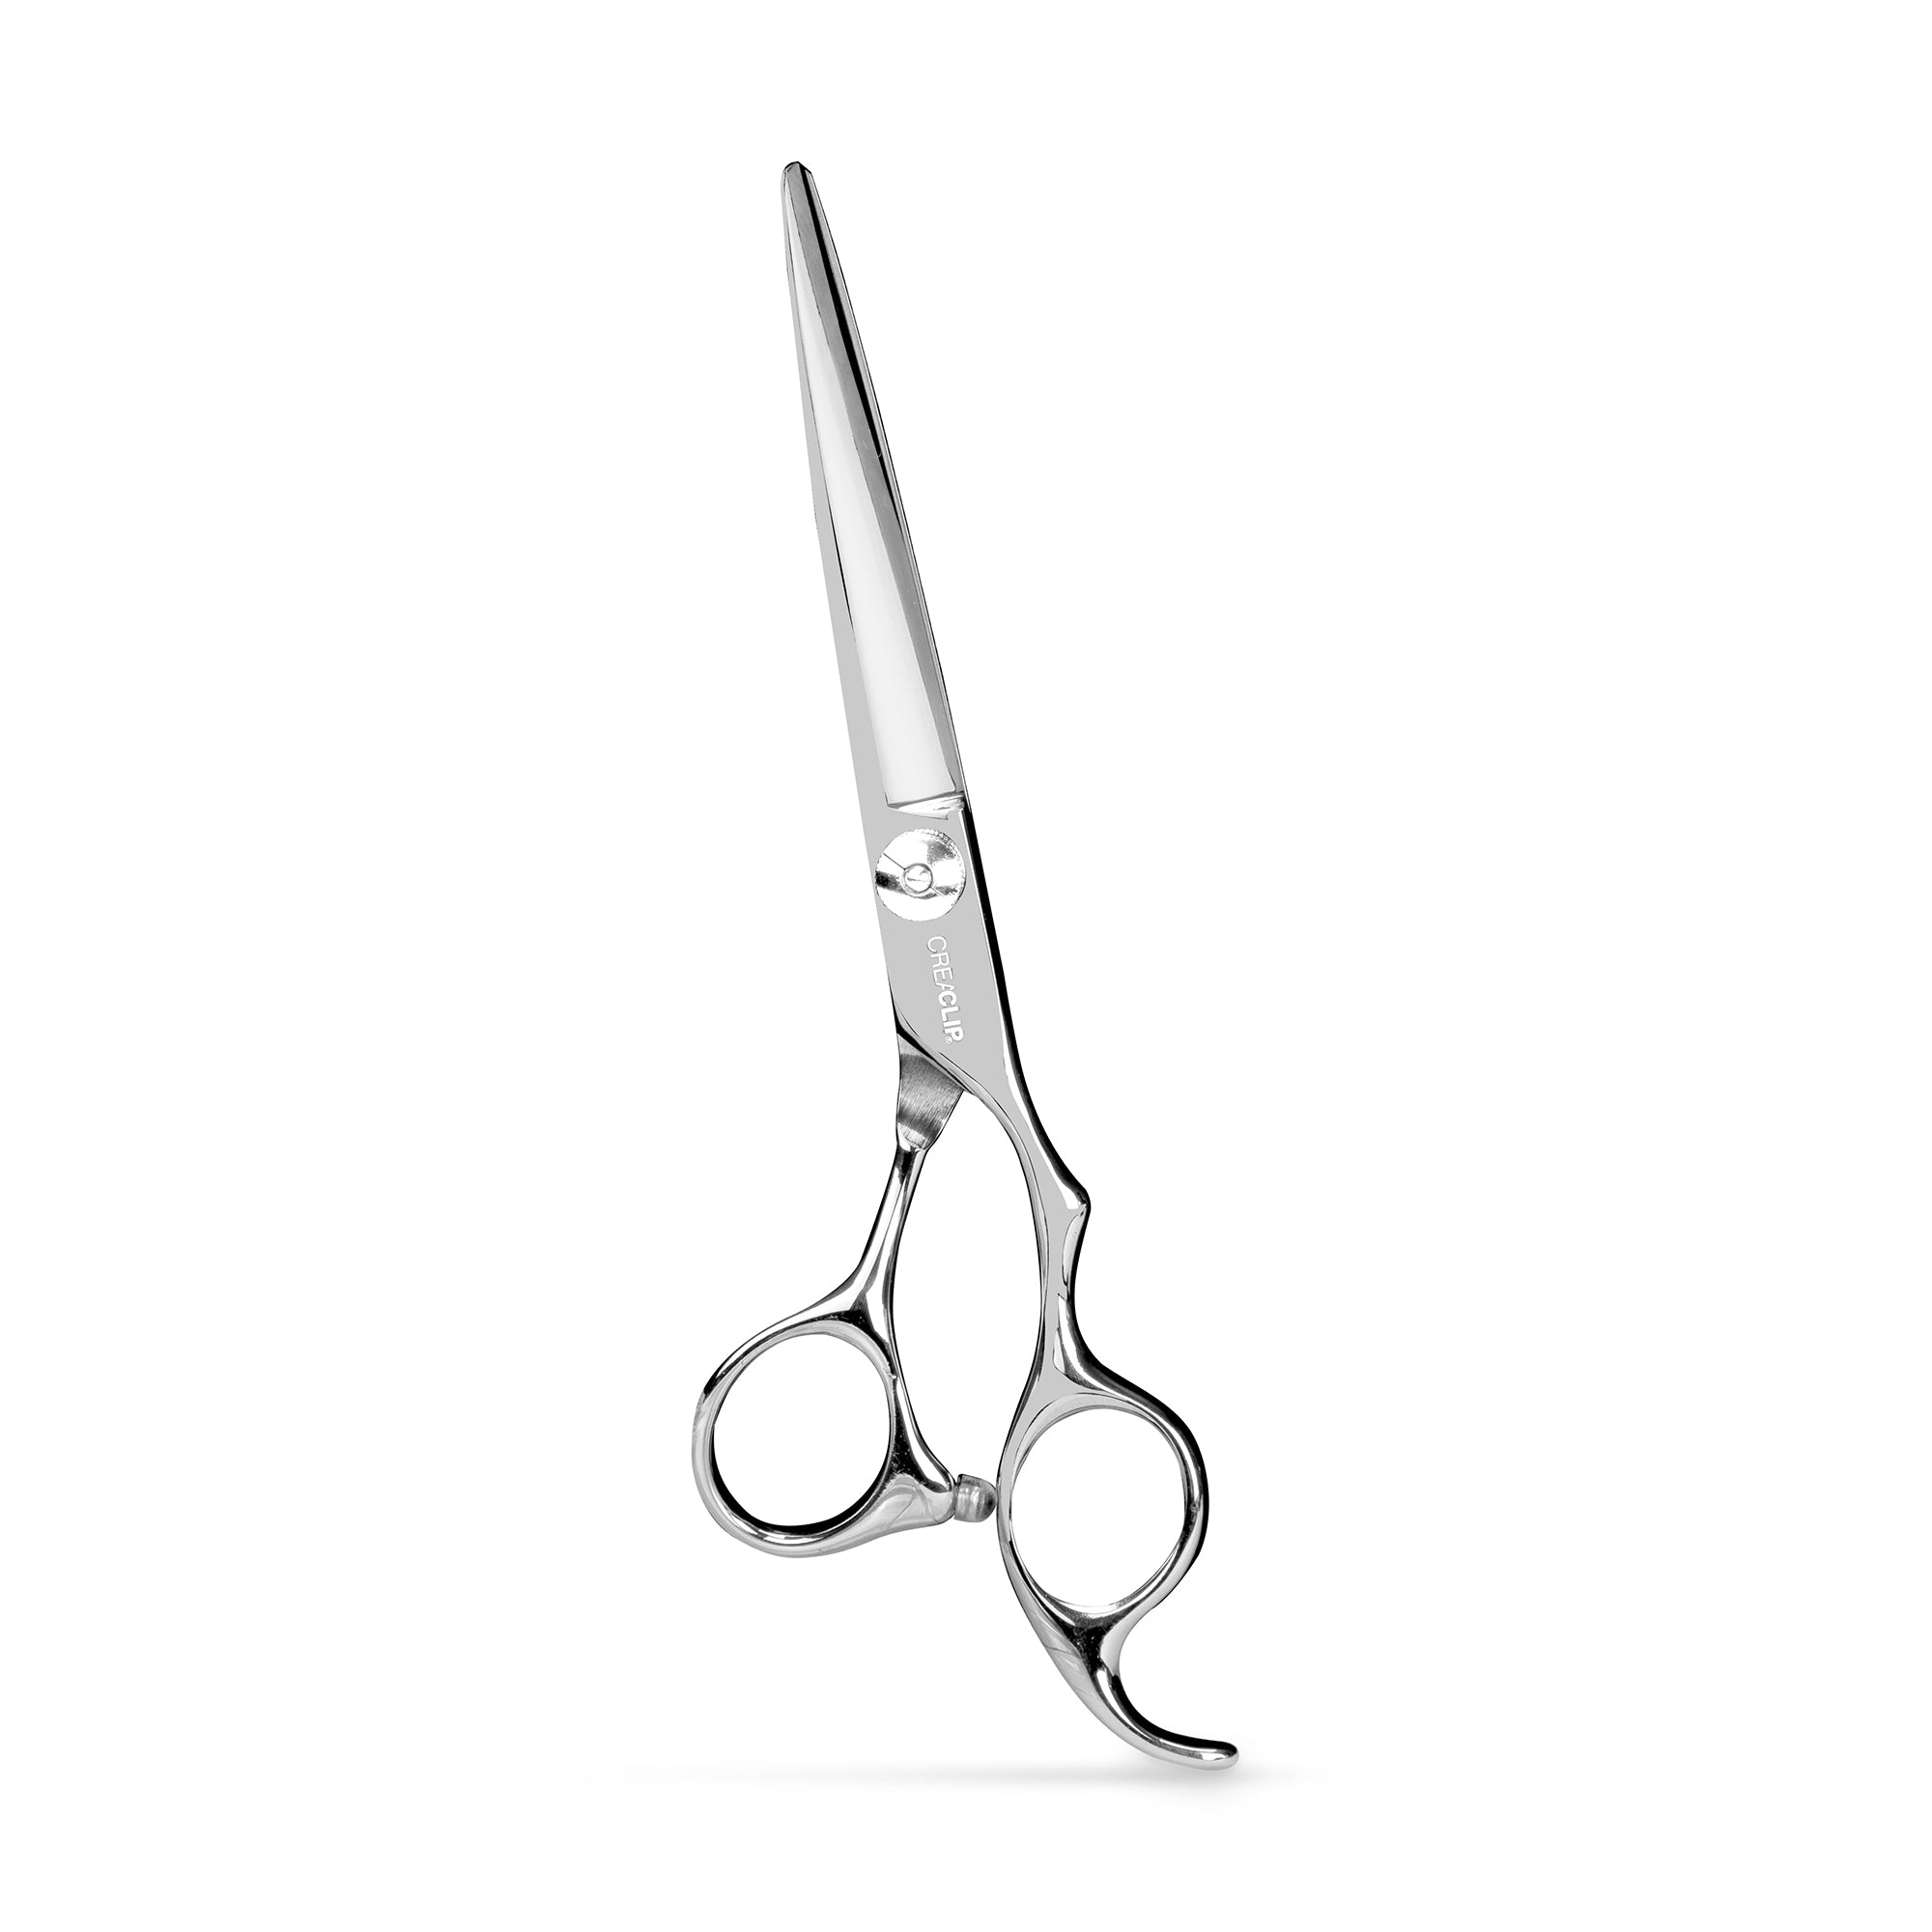 Can I cut my hair with kitchen scissors?' We asked a stylist